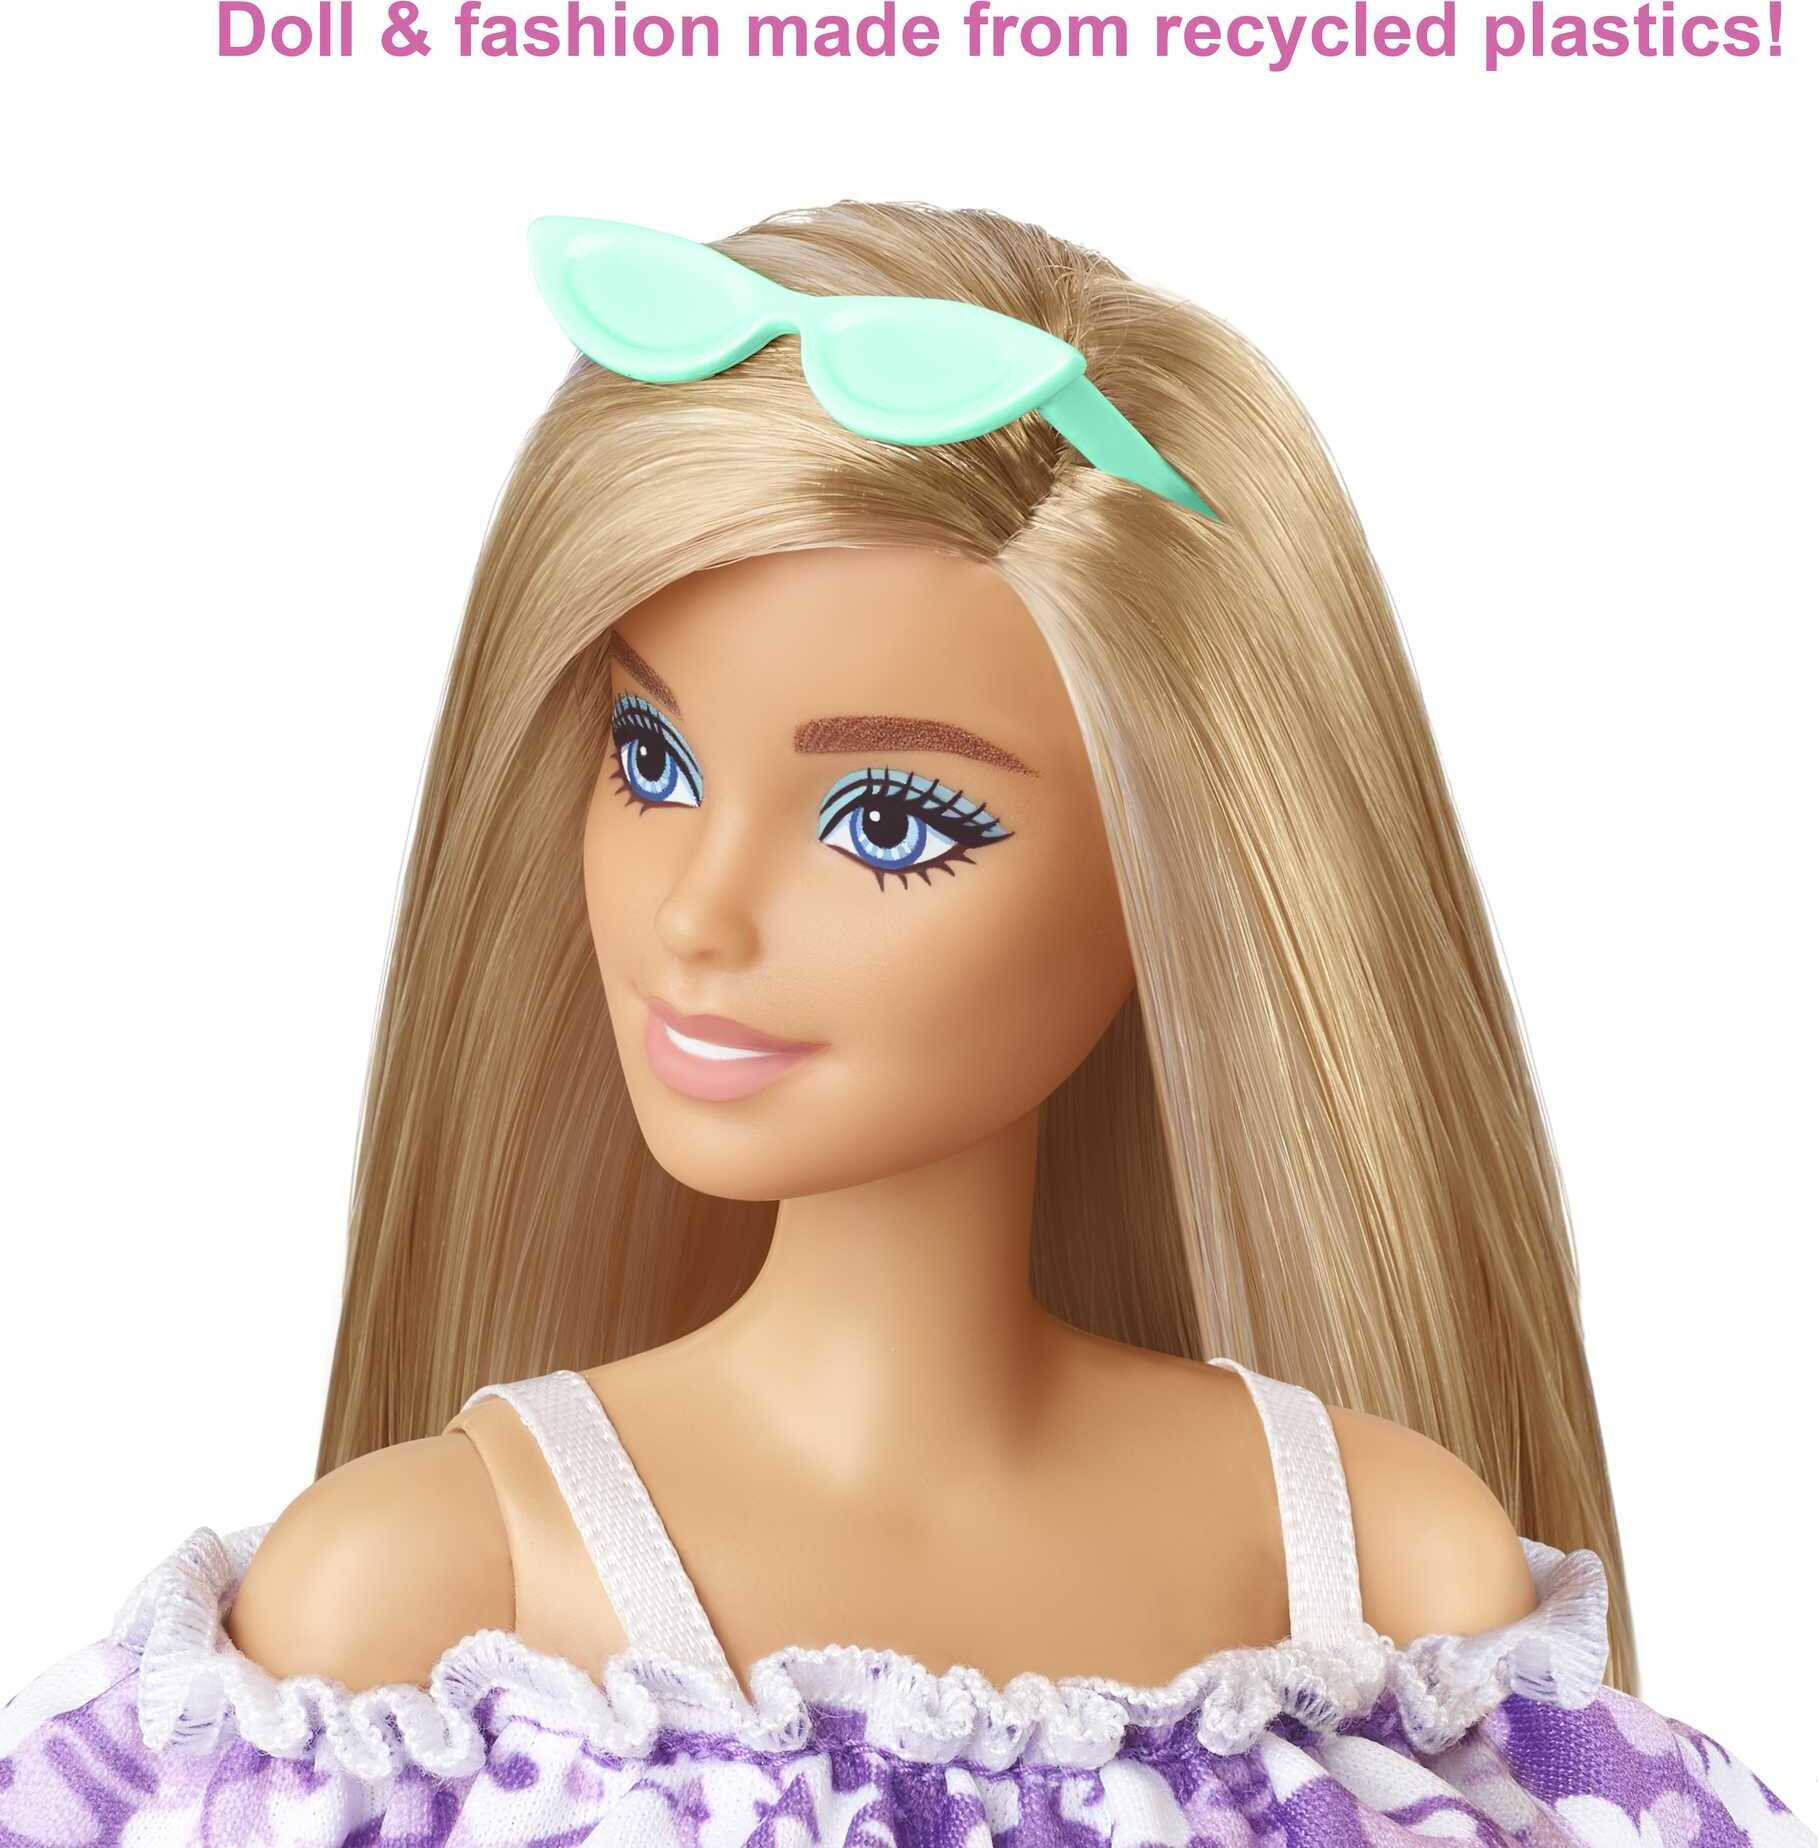 Barbie Loves the Ocean Beach Doll with Blonde Hair in Sundress, Made from Recycled Plastics - image 3 of 6